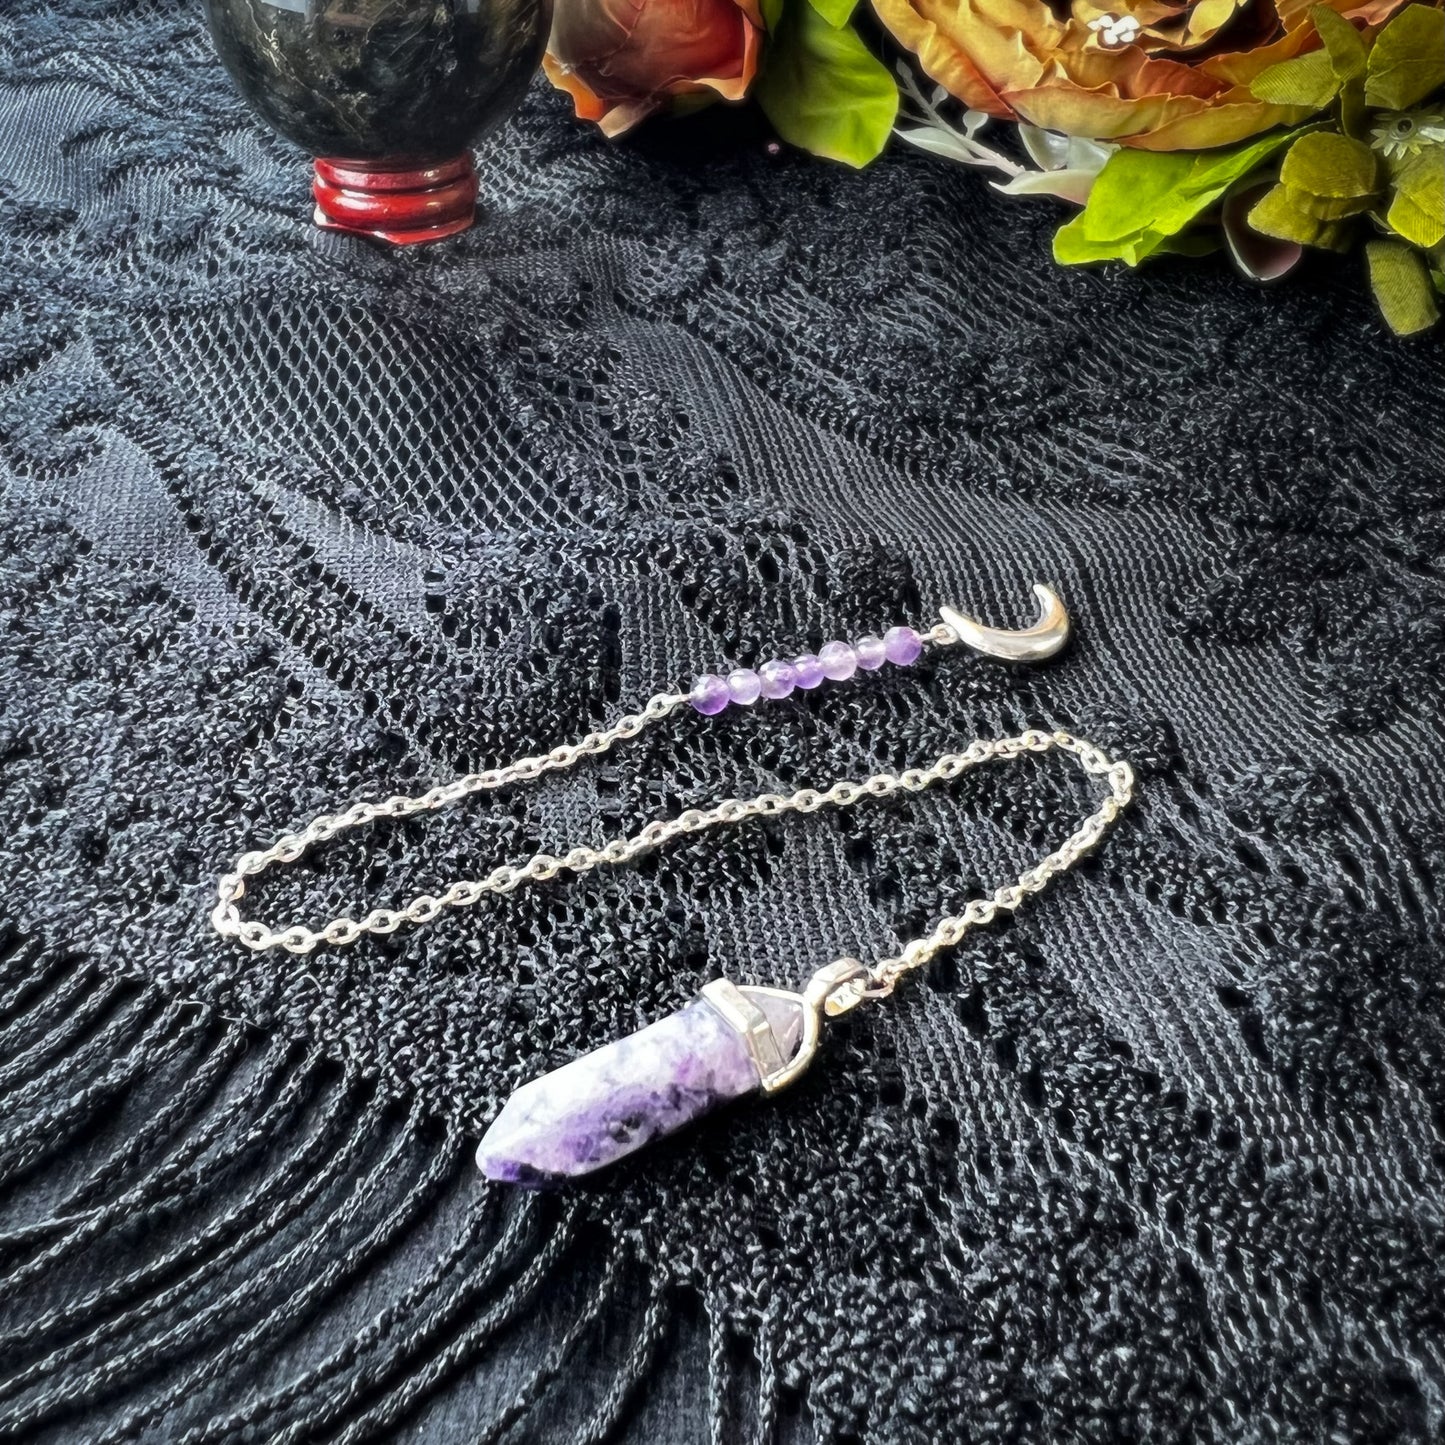 Charoite, Amethyst and Moon crescent dowsing divination pendulum - The French Witch shop